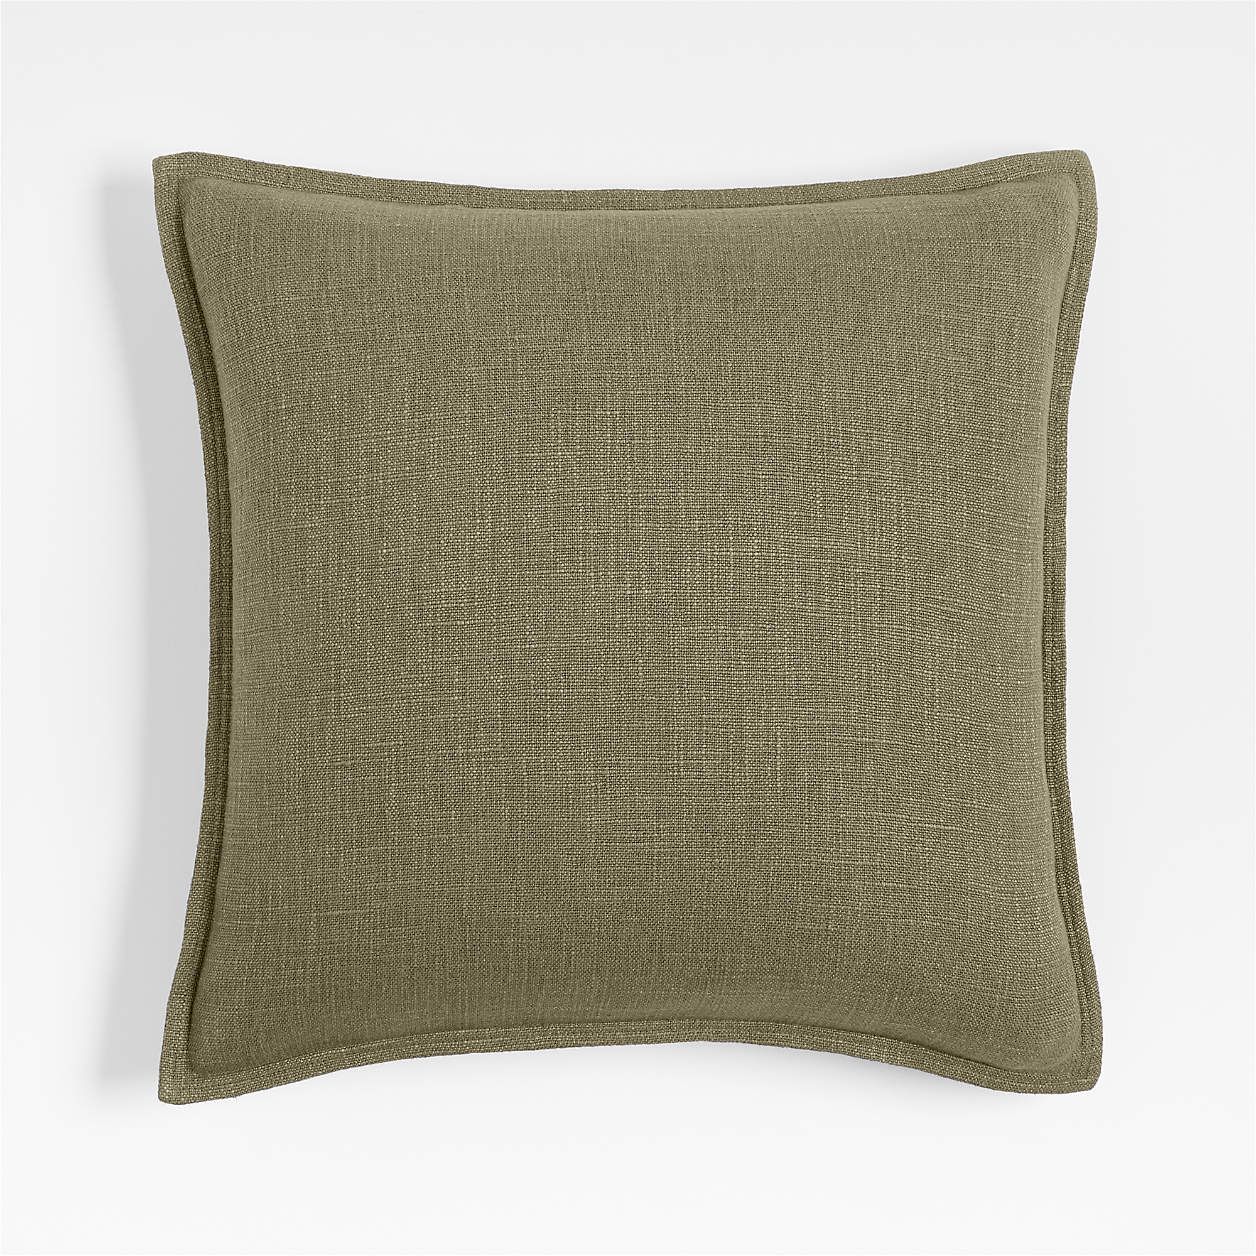 Laundered Linen 20"x20" Moody Mauve Throw Pillow Cover + Reviews | Crate & Barrel | Crate & Barrel